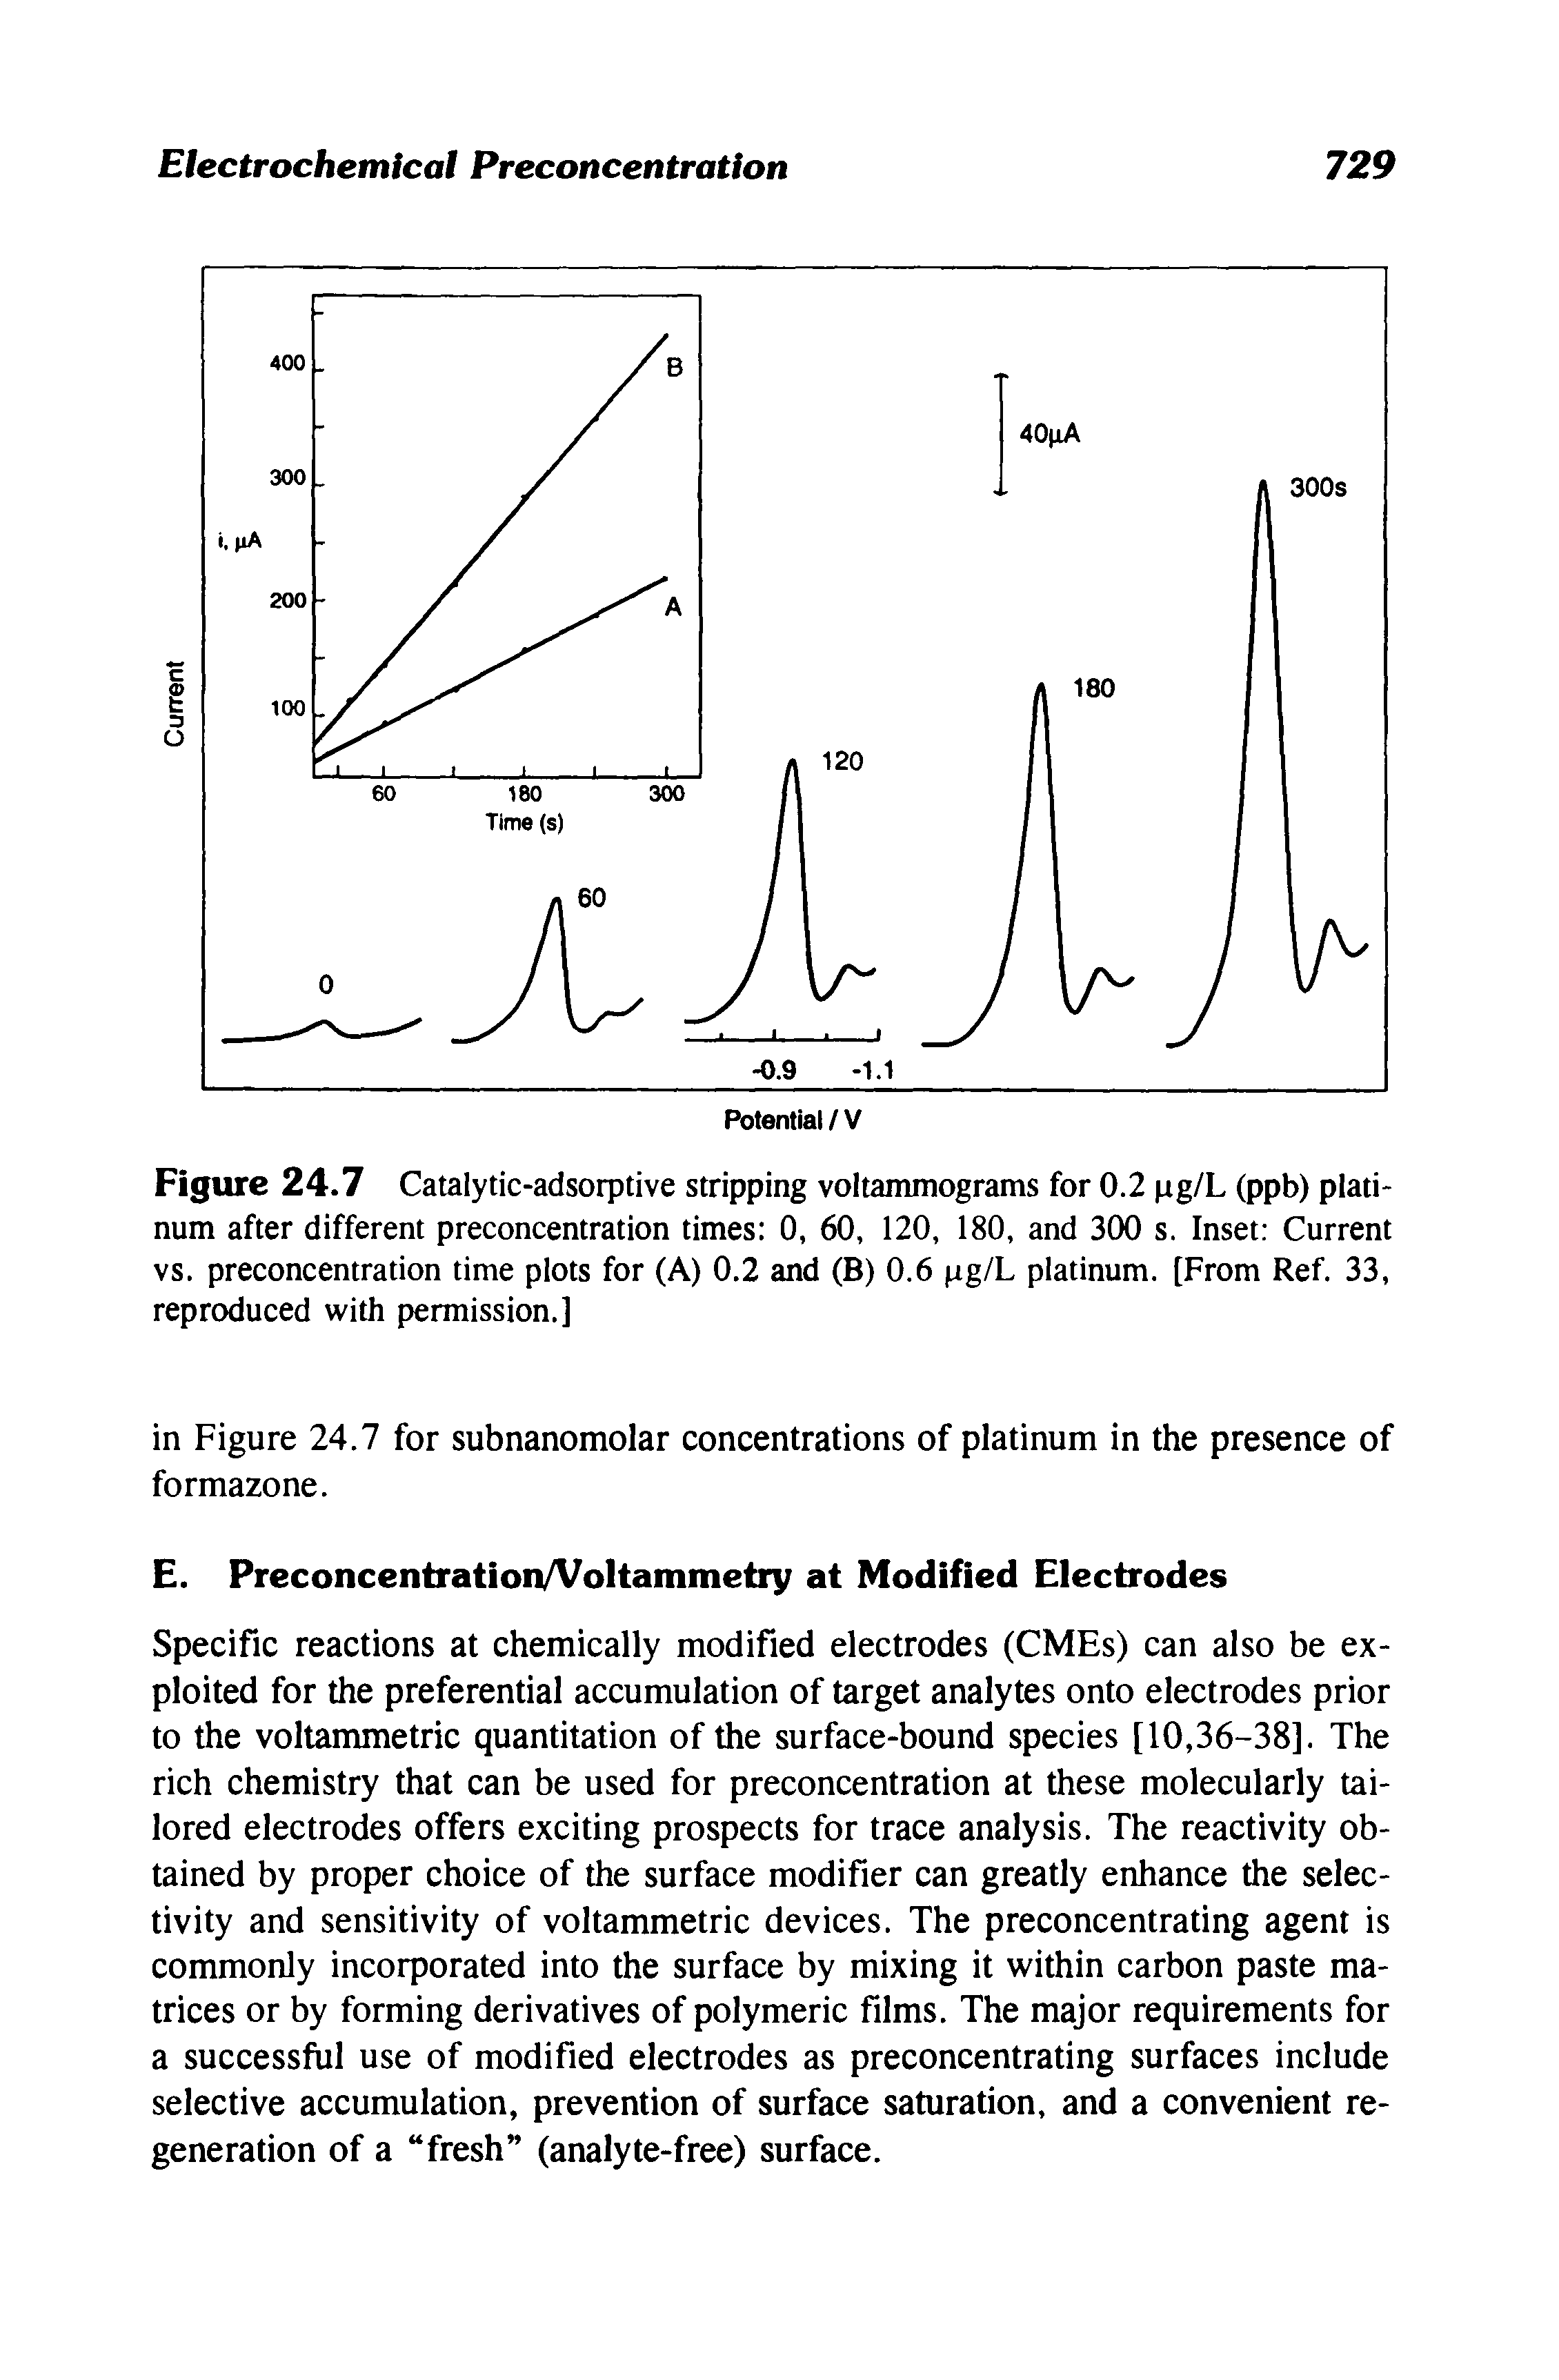 Figure 24.7 Catalytic-adsorptive stripping voltammograms for 0.2 pg/L (ppb) platinum after different preconcentration times 0, 60, 120, 180, and 300 s. Inset Current vs. preconcentration time plots for (A) 0.2 and (B) 0.6 pg/L platinum. [From Ref. 33, reproduced with permission.]...